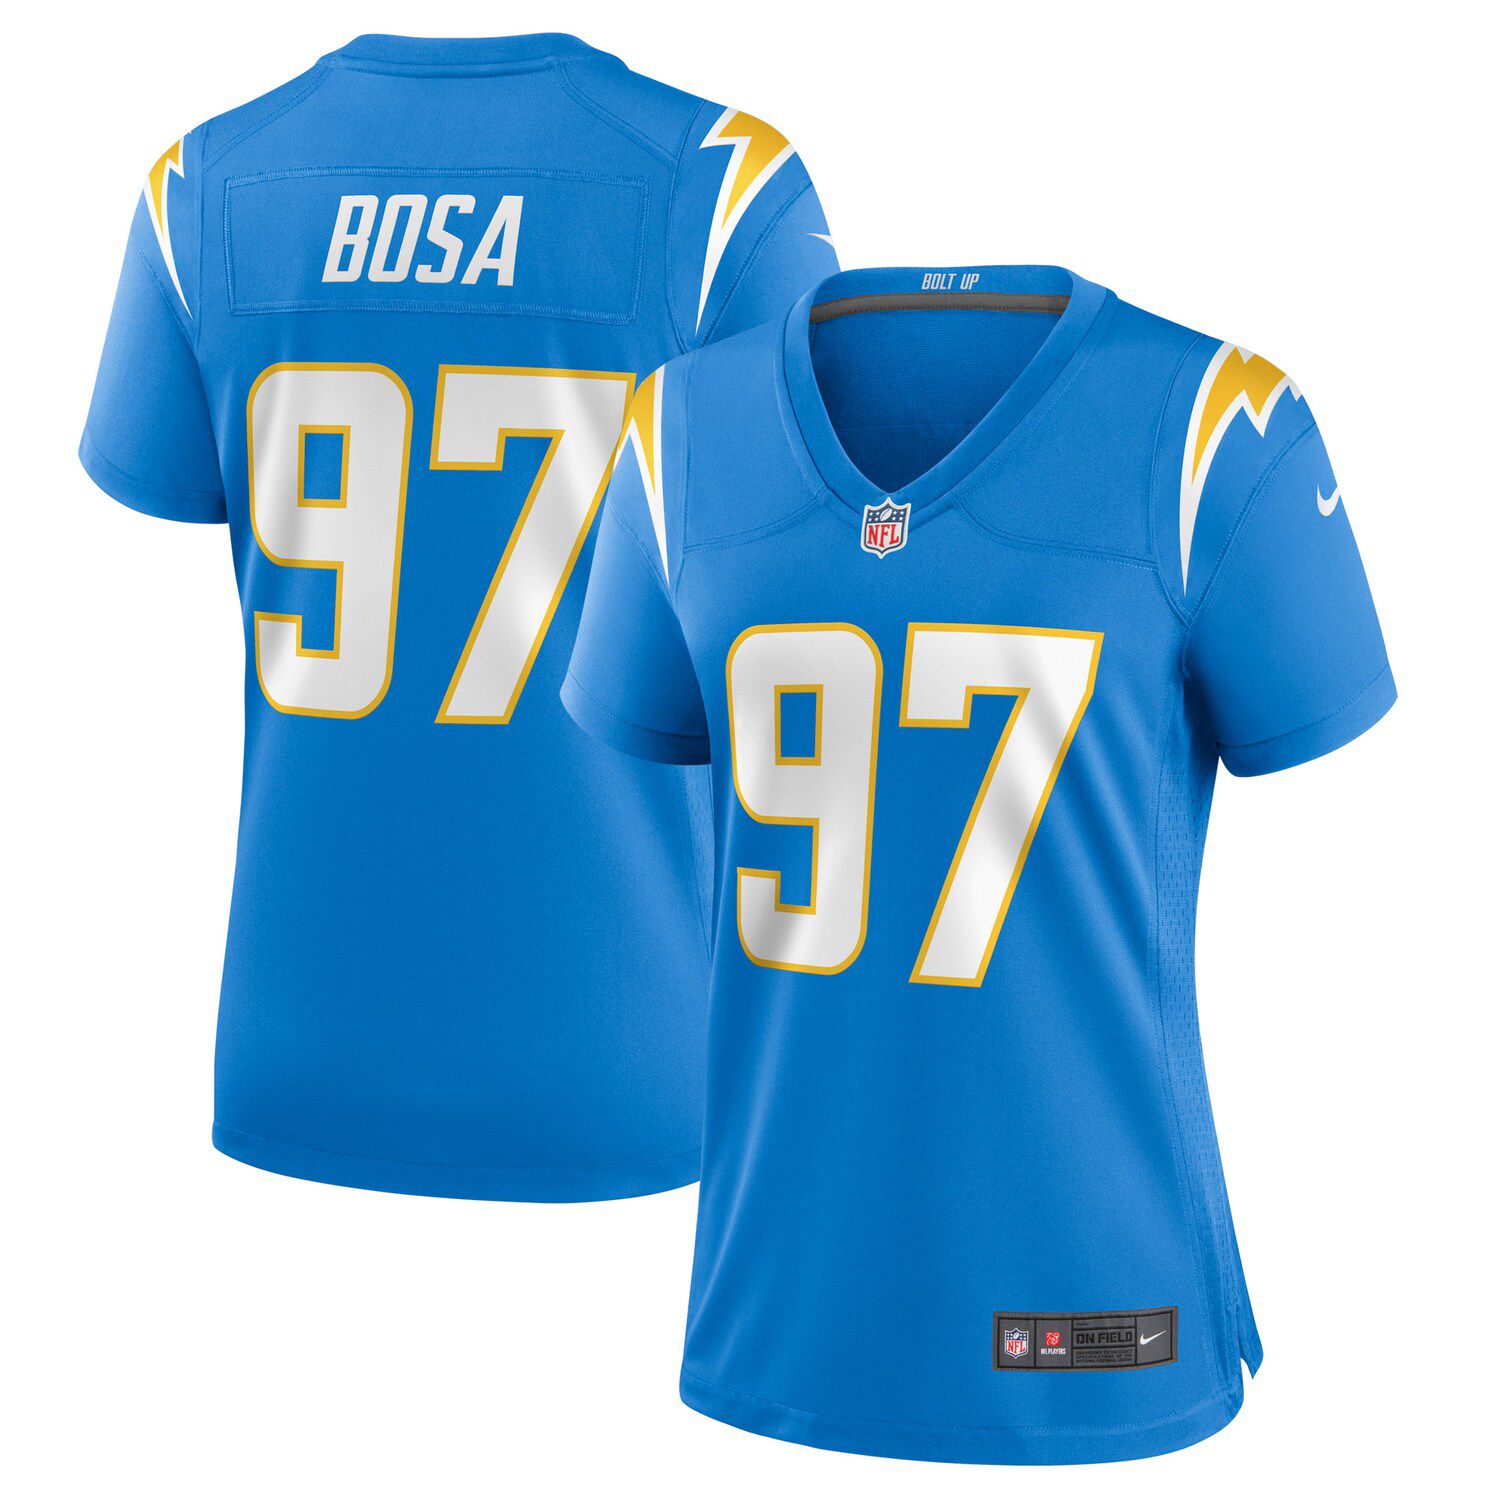 chargers jersey for women